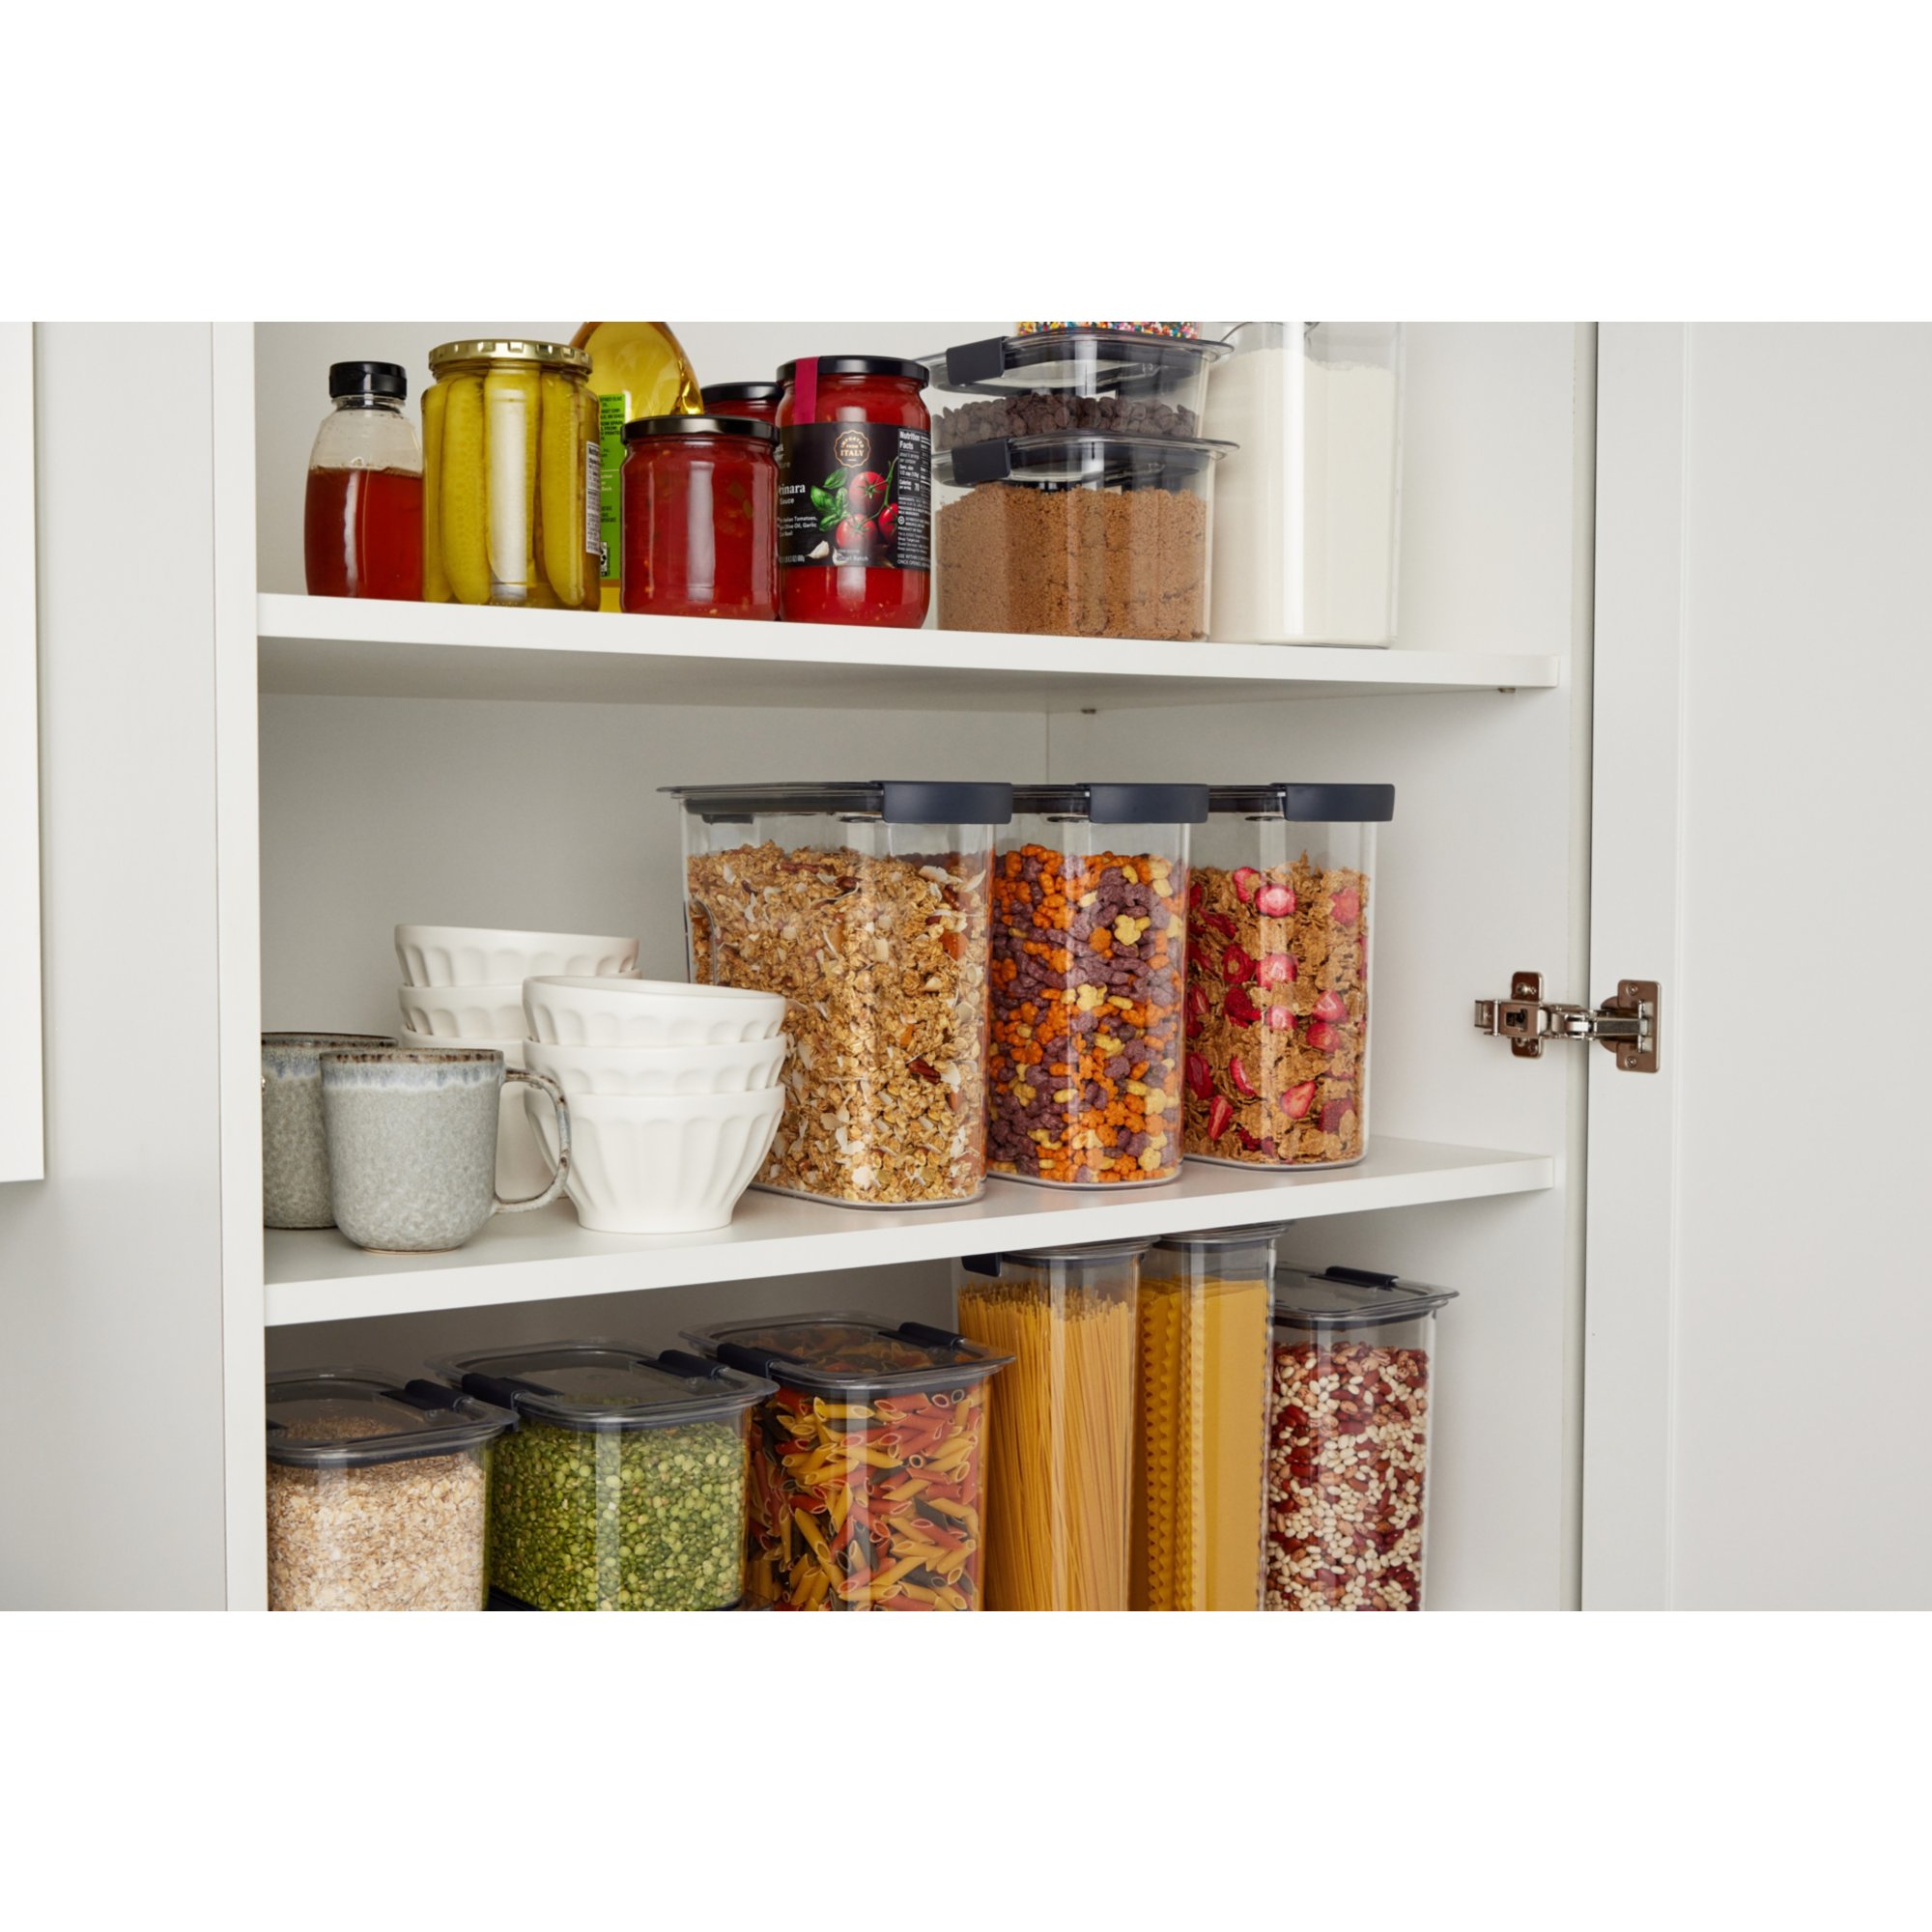 Rubbermaid Brilliance Pantry Storage Container, 19.9 Cup